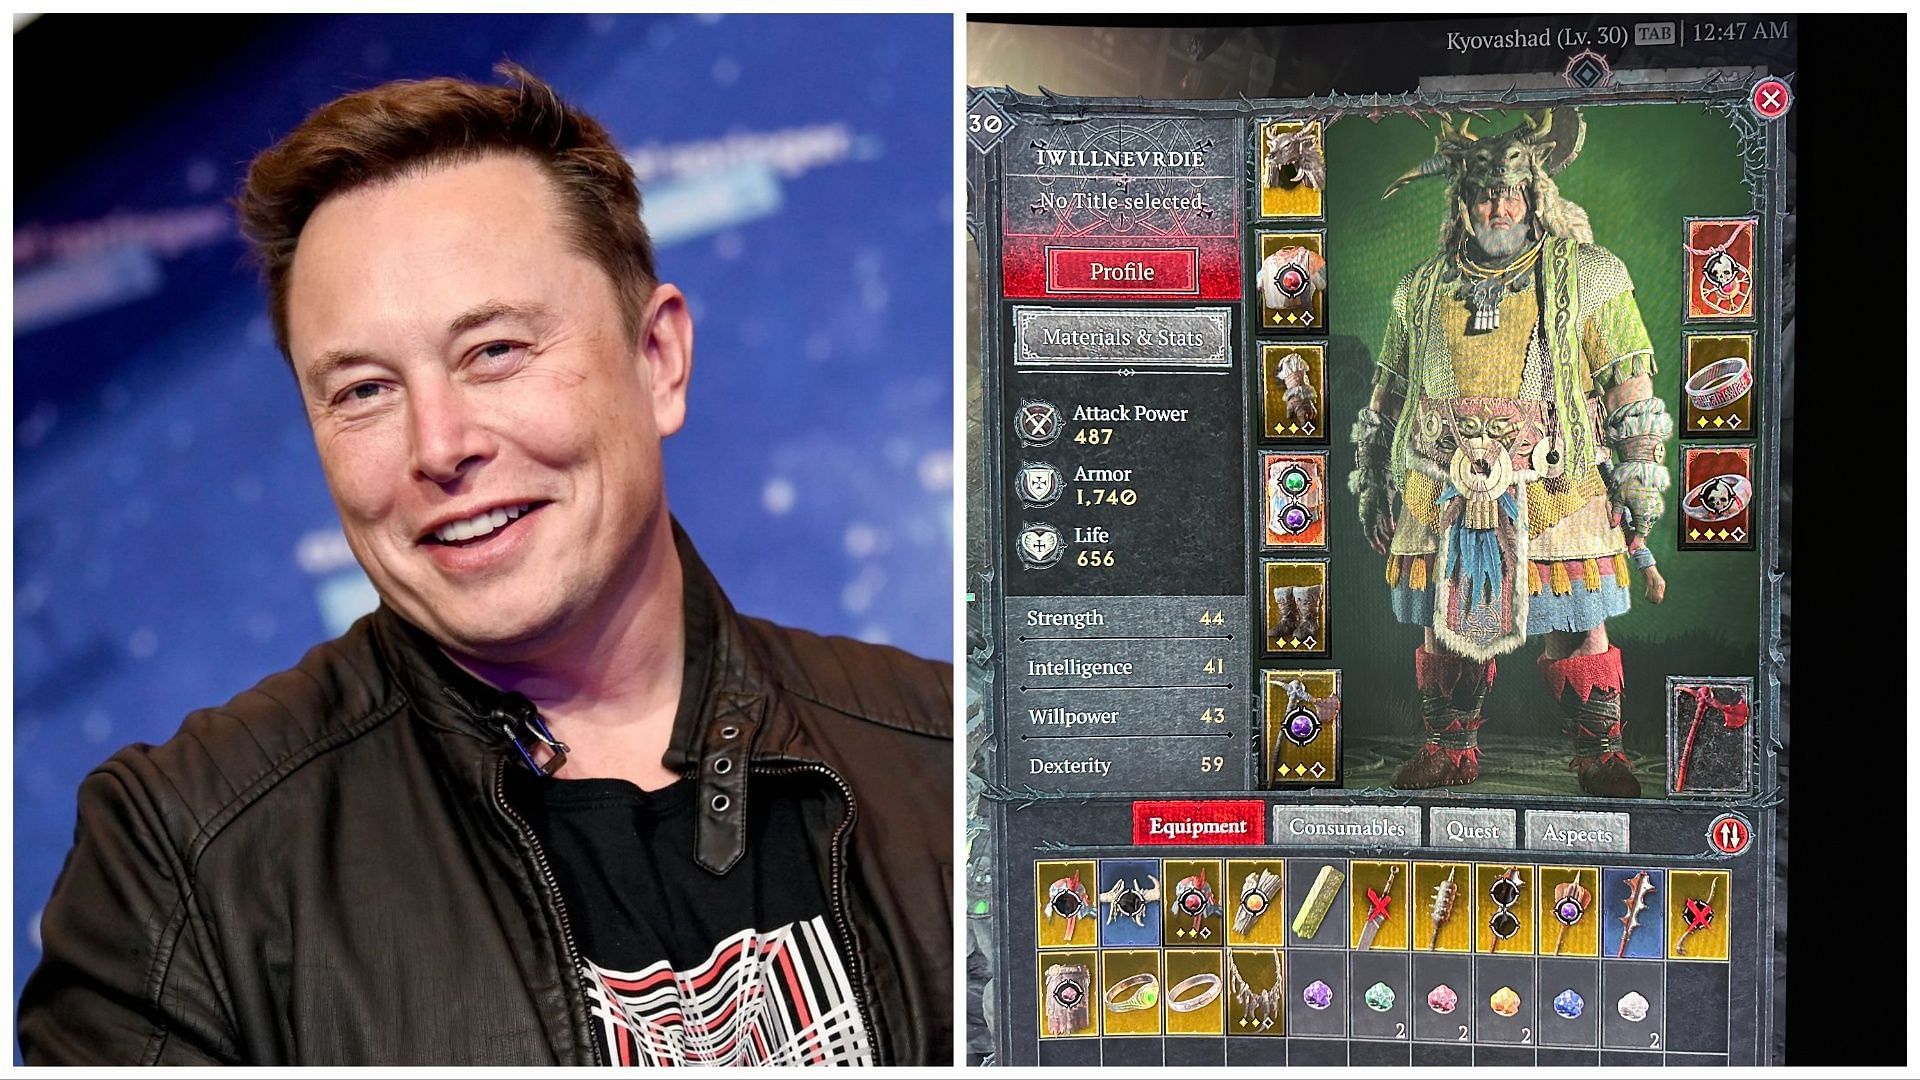 Elon Musk plays as a Druid in Diablo 4 with the name &quot;IWillNevrDie&quot;.